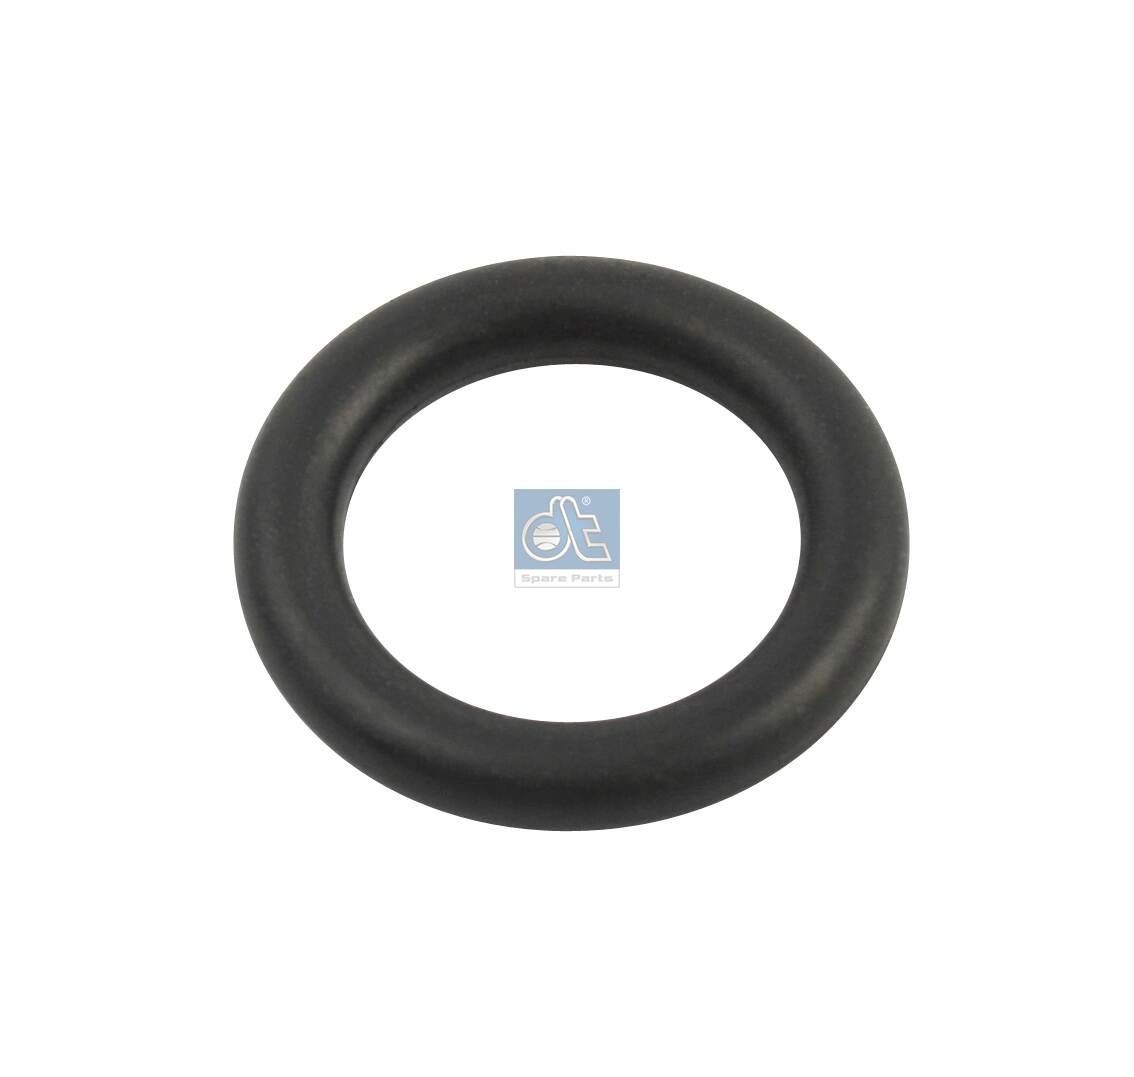 DT Spare Parts 12 x 3 mm, NBR (nitrile butadiene rubber) Seal Ring 1.24301 buy